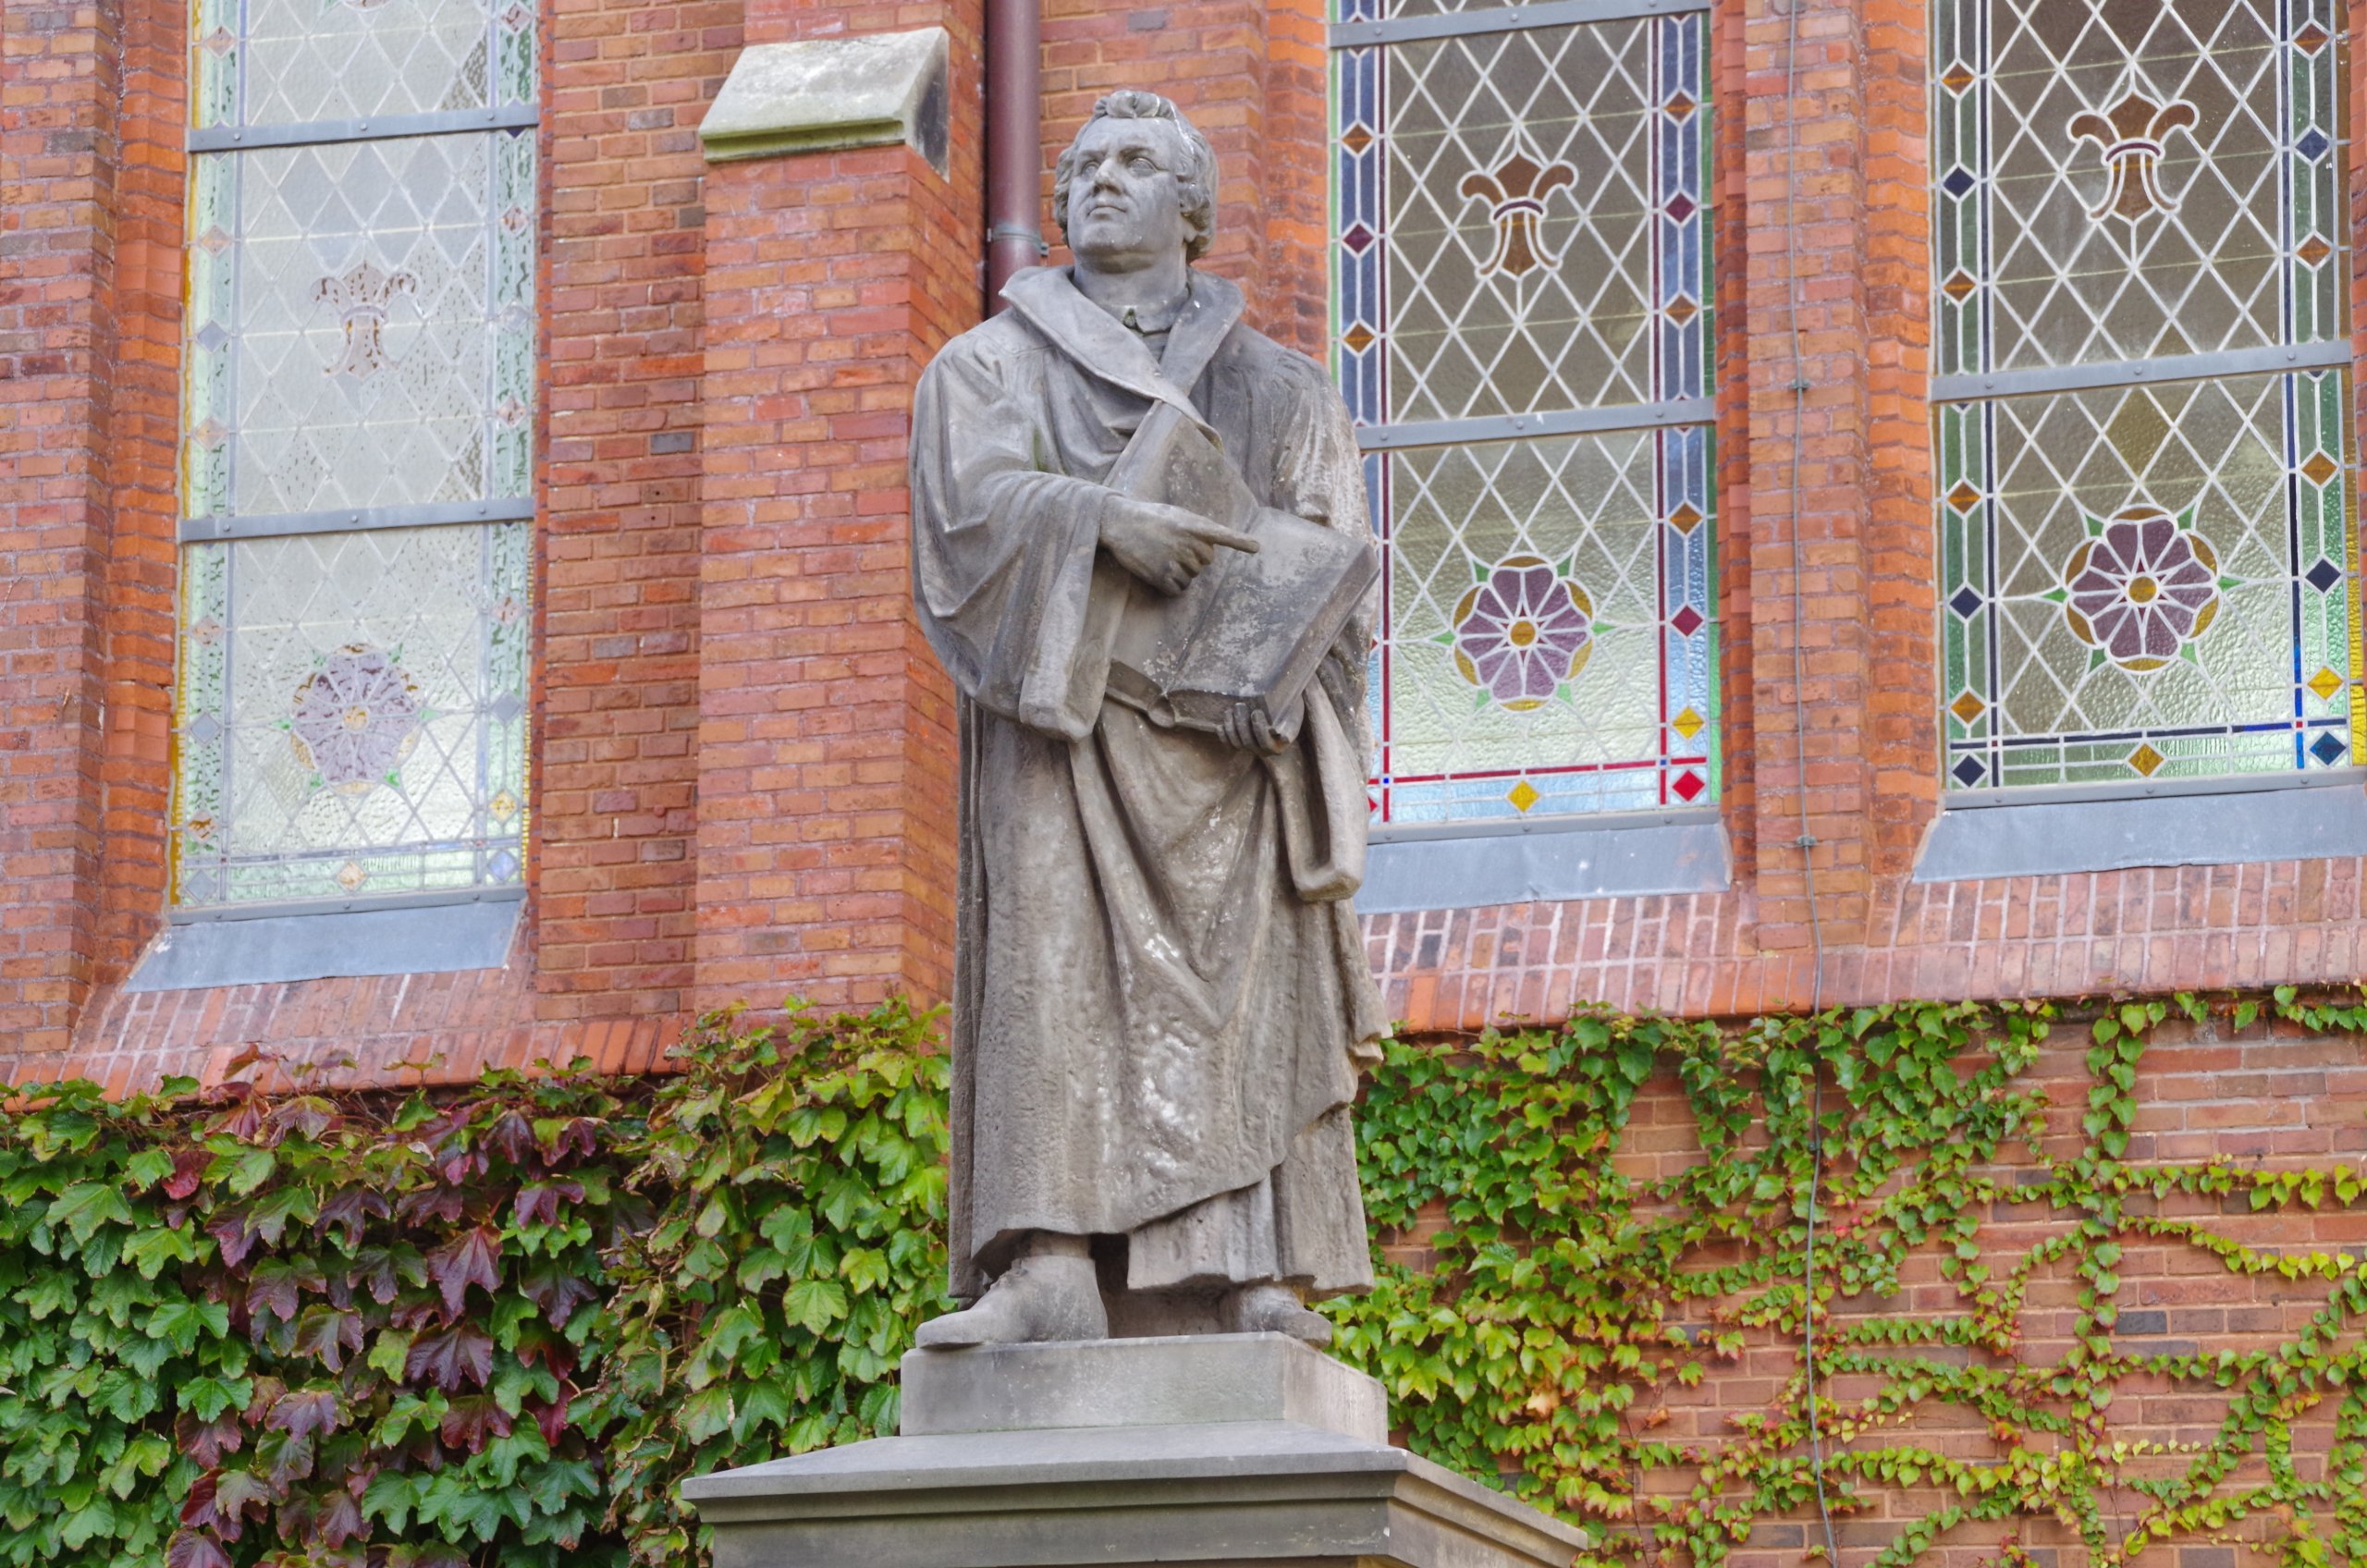 Luther-Denkmal